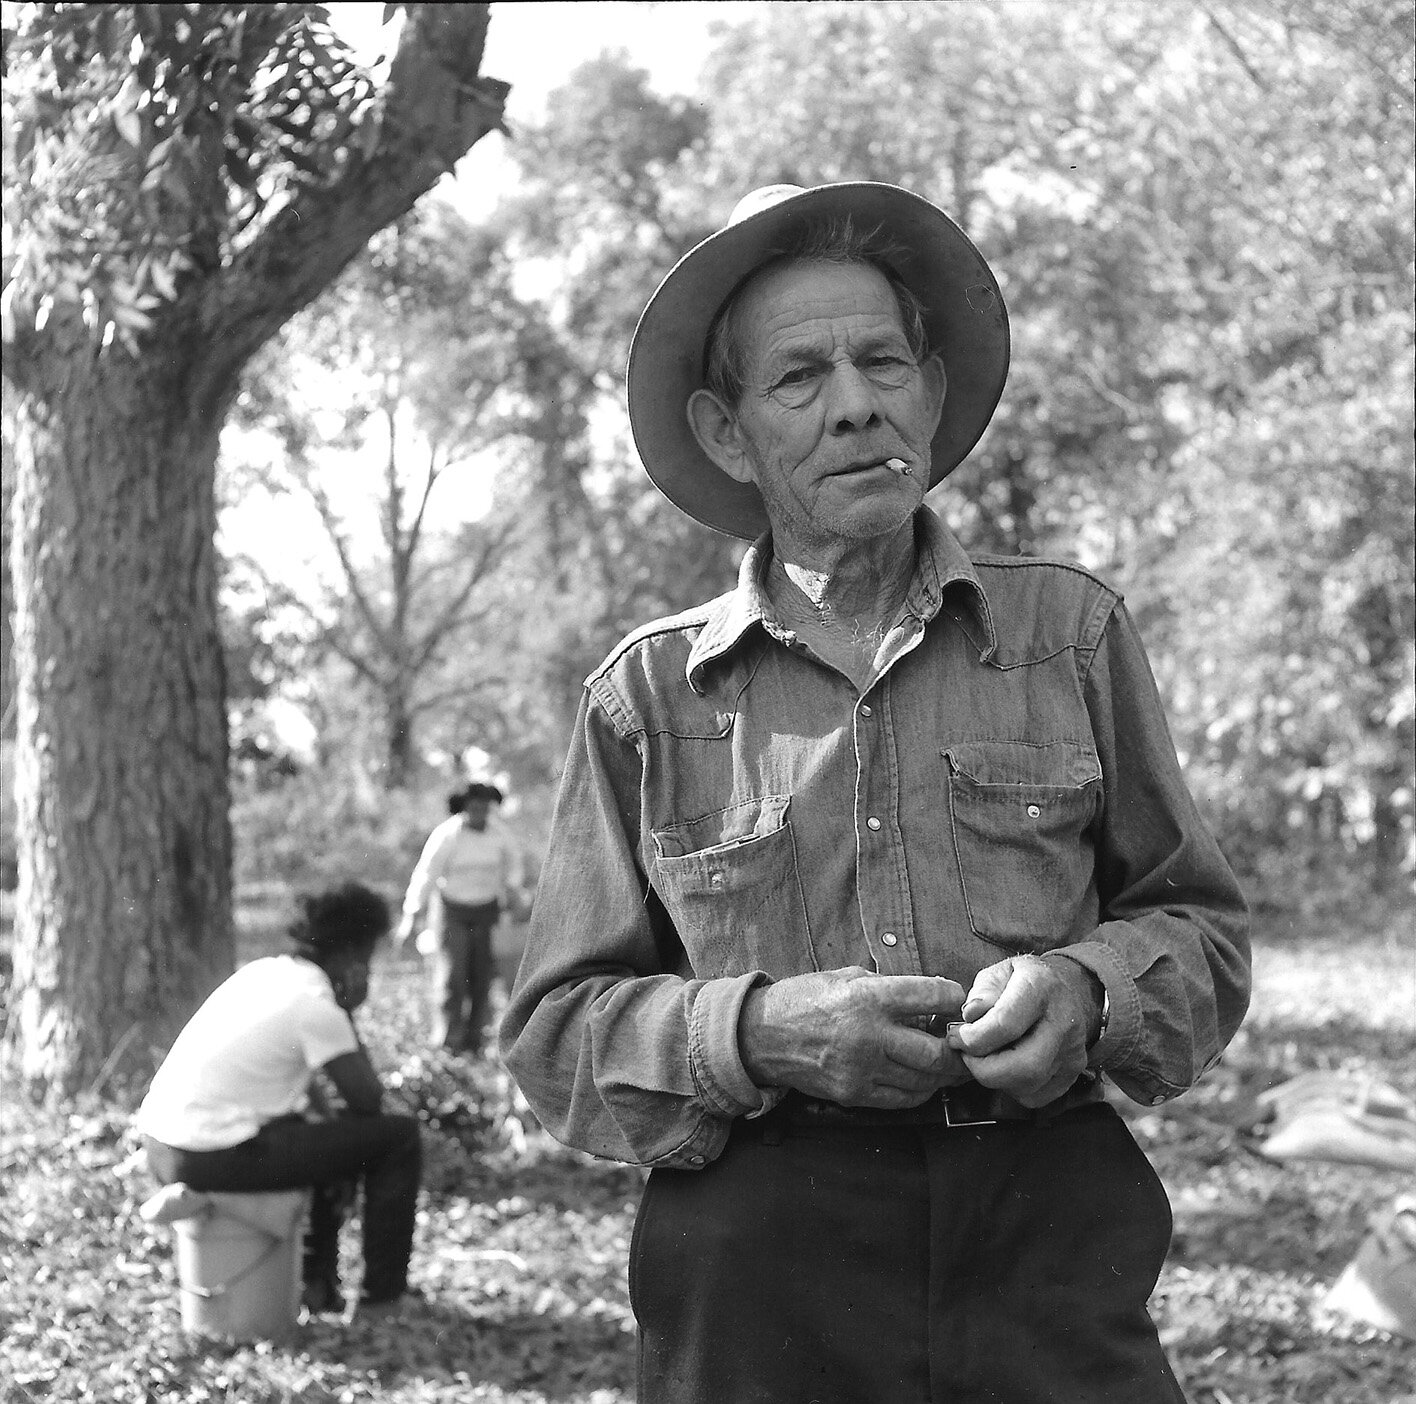   The Bossman in Pecan Grove East of Climax, GA,  1981 Gelatin Silver Print 9 1/2 x 9 1/2 in. (Image Size) The Do Good Fund, Inc., 2020-082 